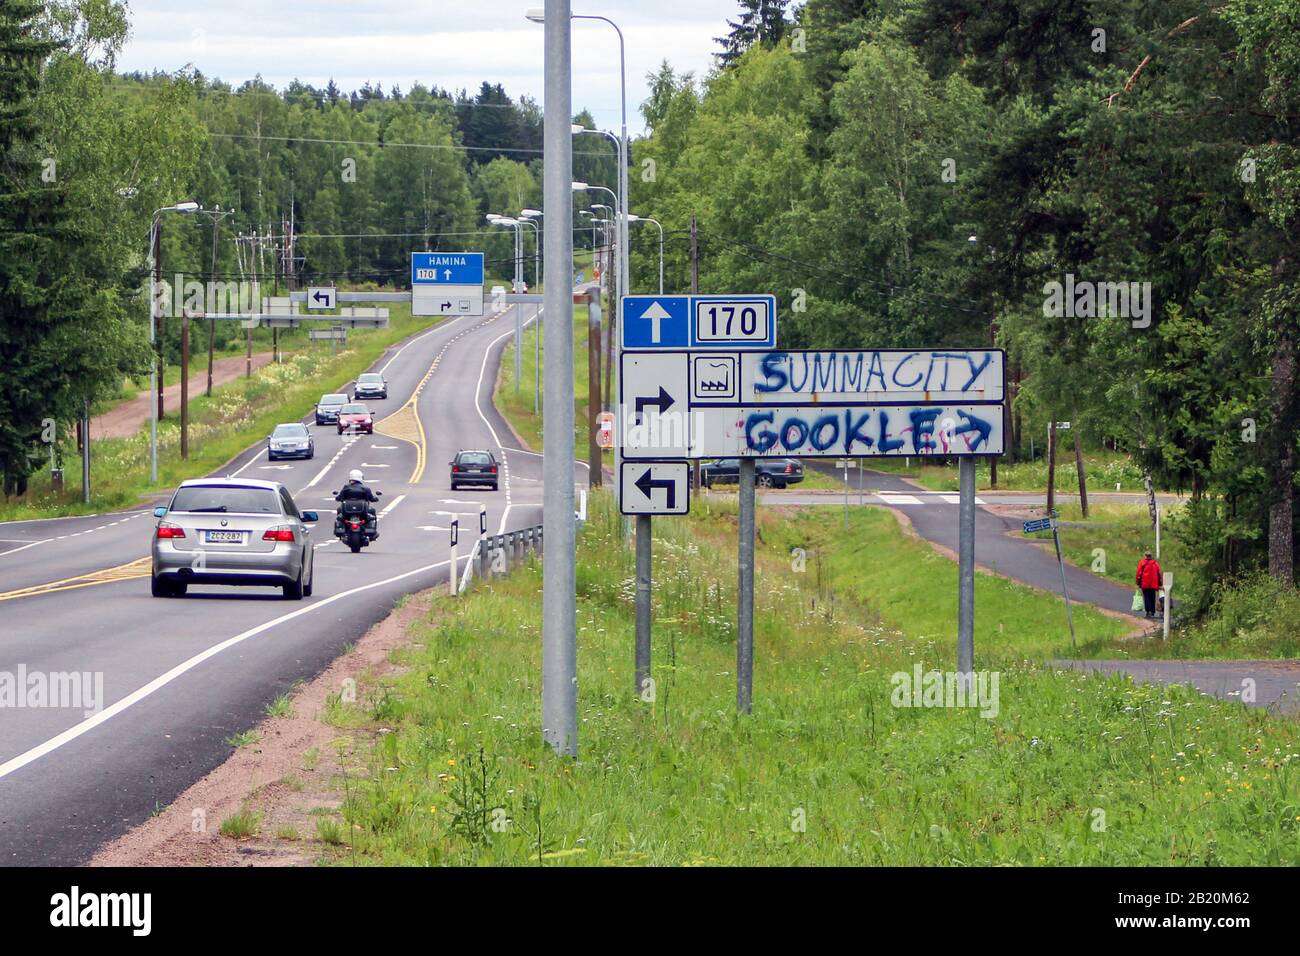 Spray-painted driving direction sign pointing the way to Google data center, former pulp factory or paper mill, in Summa district of Hamina, Finland Stock Photo